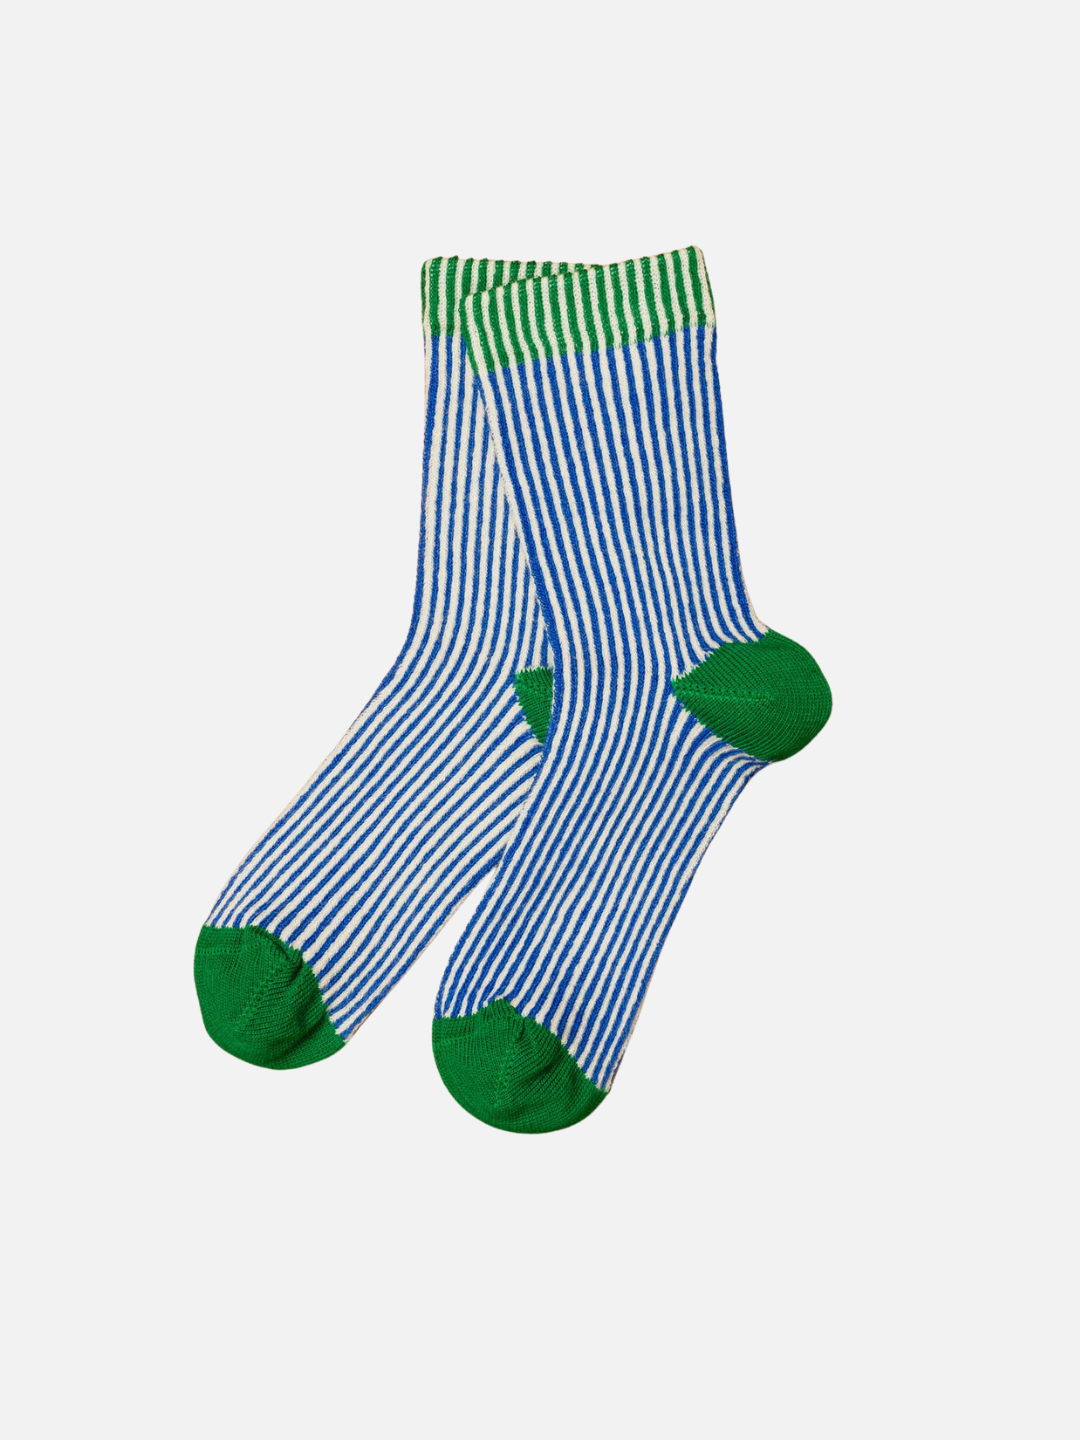 Cobalt | Kids socks in narrow blue and white vertical stripes with kelly green toe, heel, and green stripes at ankle cuff.